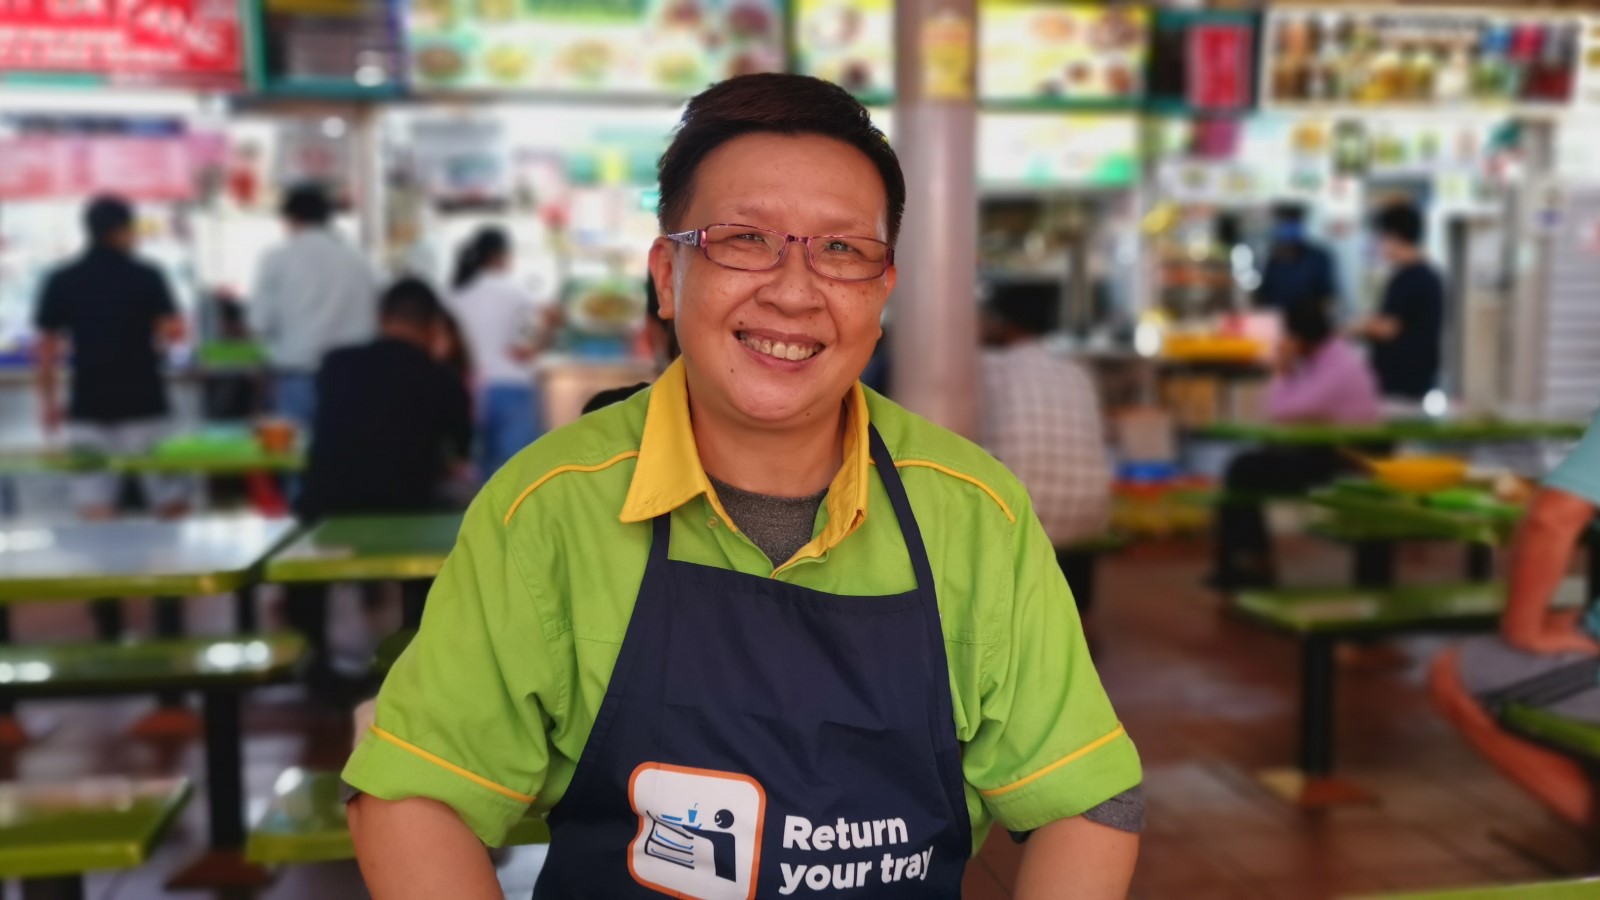 Post thumbnail of Life of a hawker centre cleaner: “I don’t ask for much, I just need enough to survive”